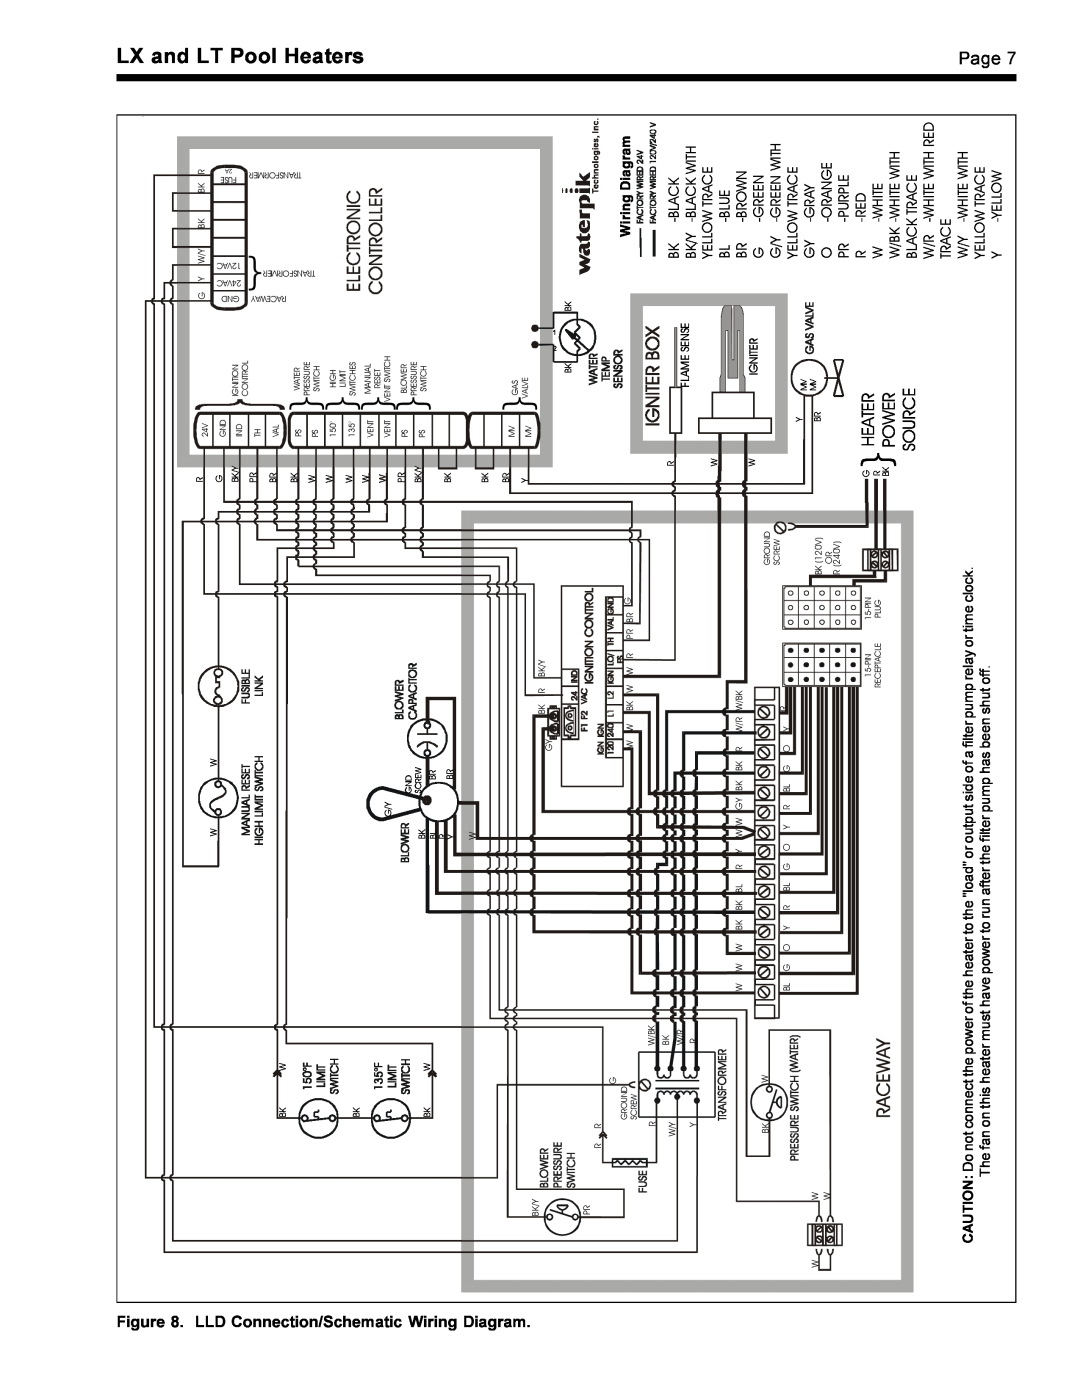 Waterpik Technologies pool/spa heater ` ` ` `, LX and LT Pool Heaters, LLD Connection/Schematic Wiring Diagram, after the 